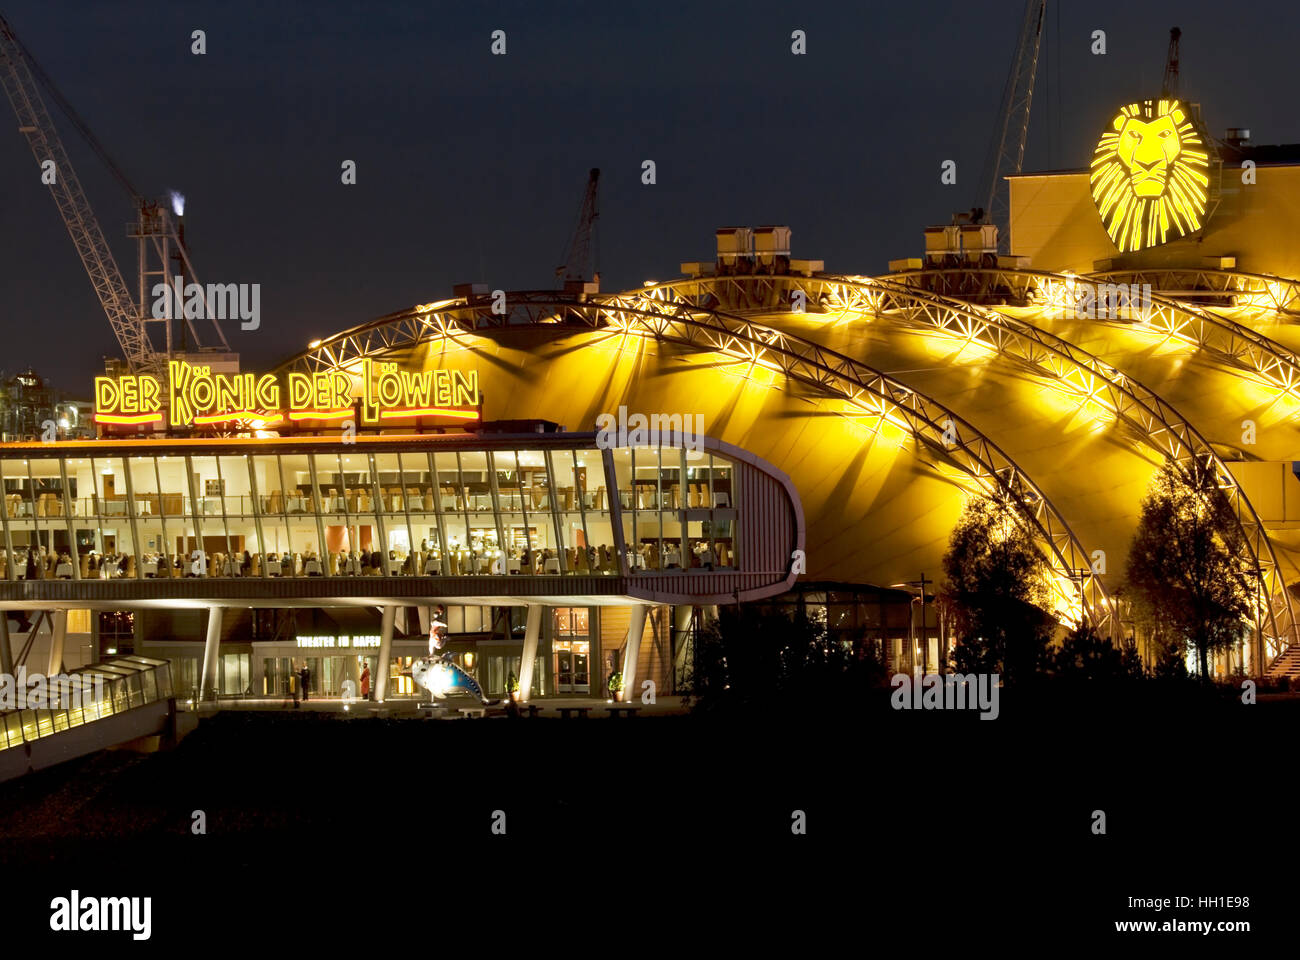 Hamburg The Lion King High Resolution Stock Photography and Images - Alamy